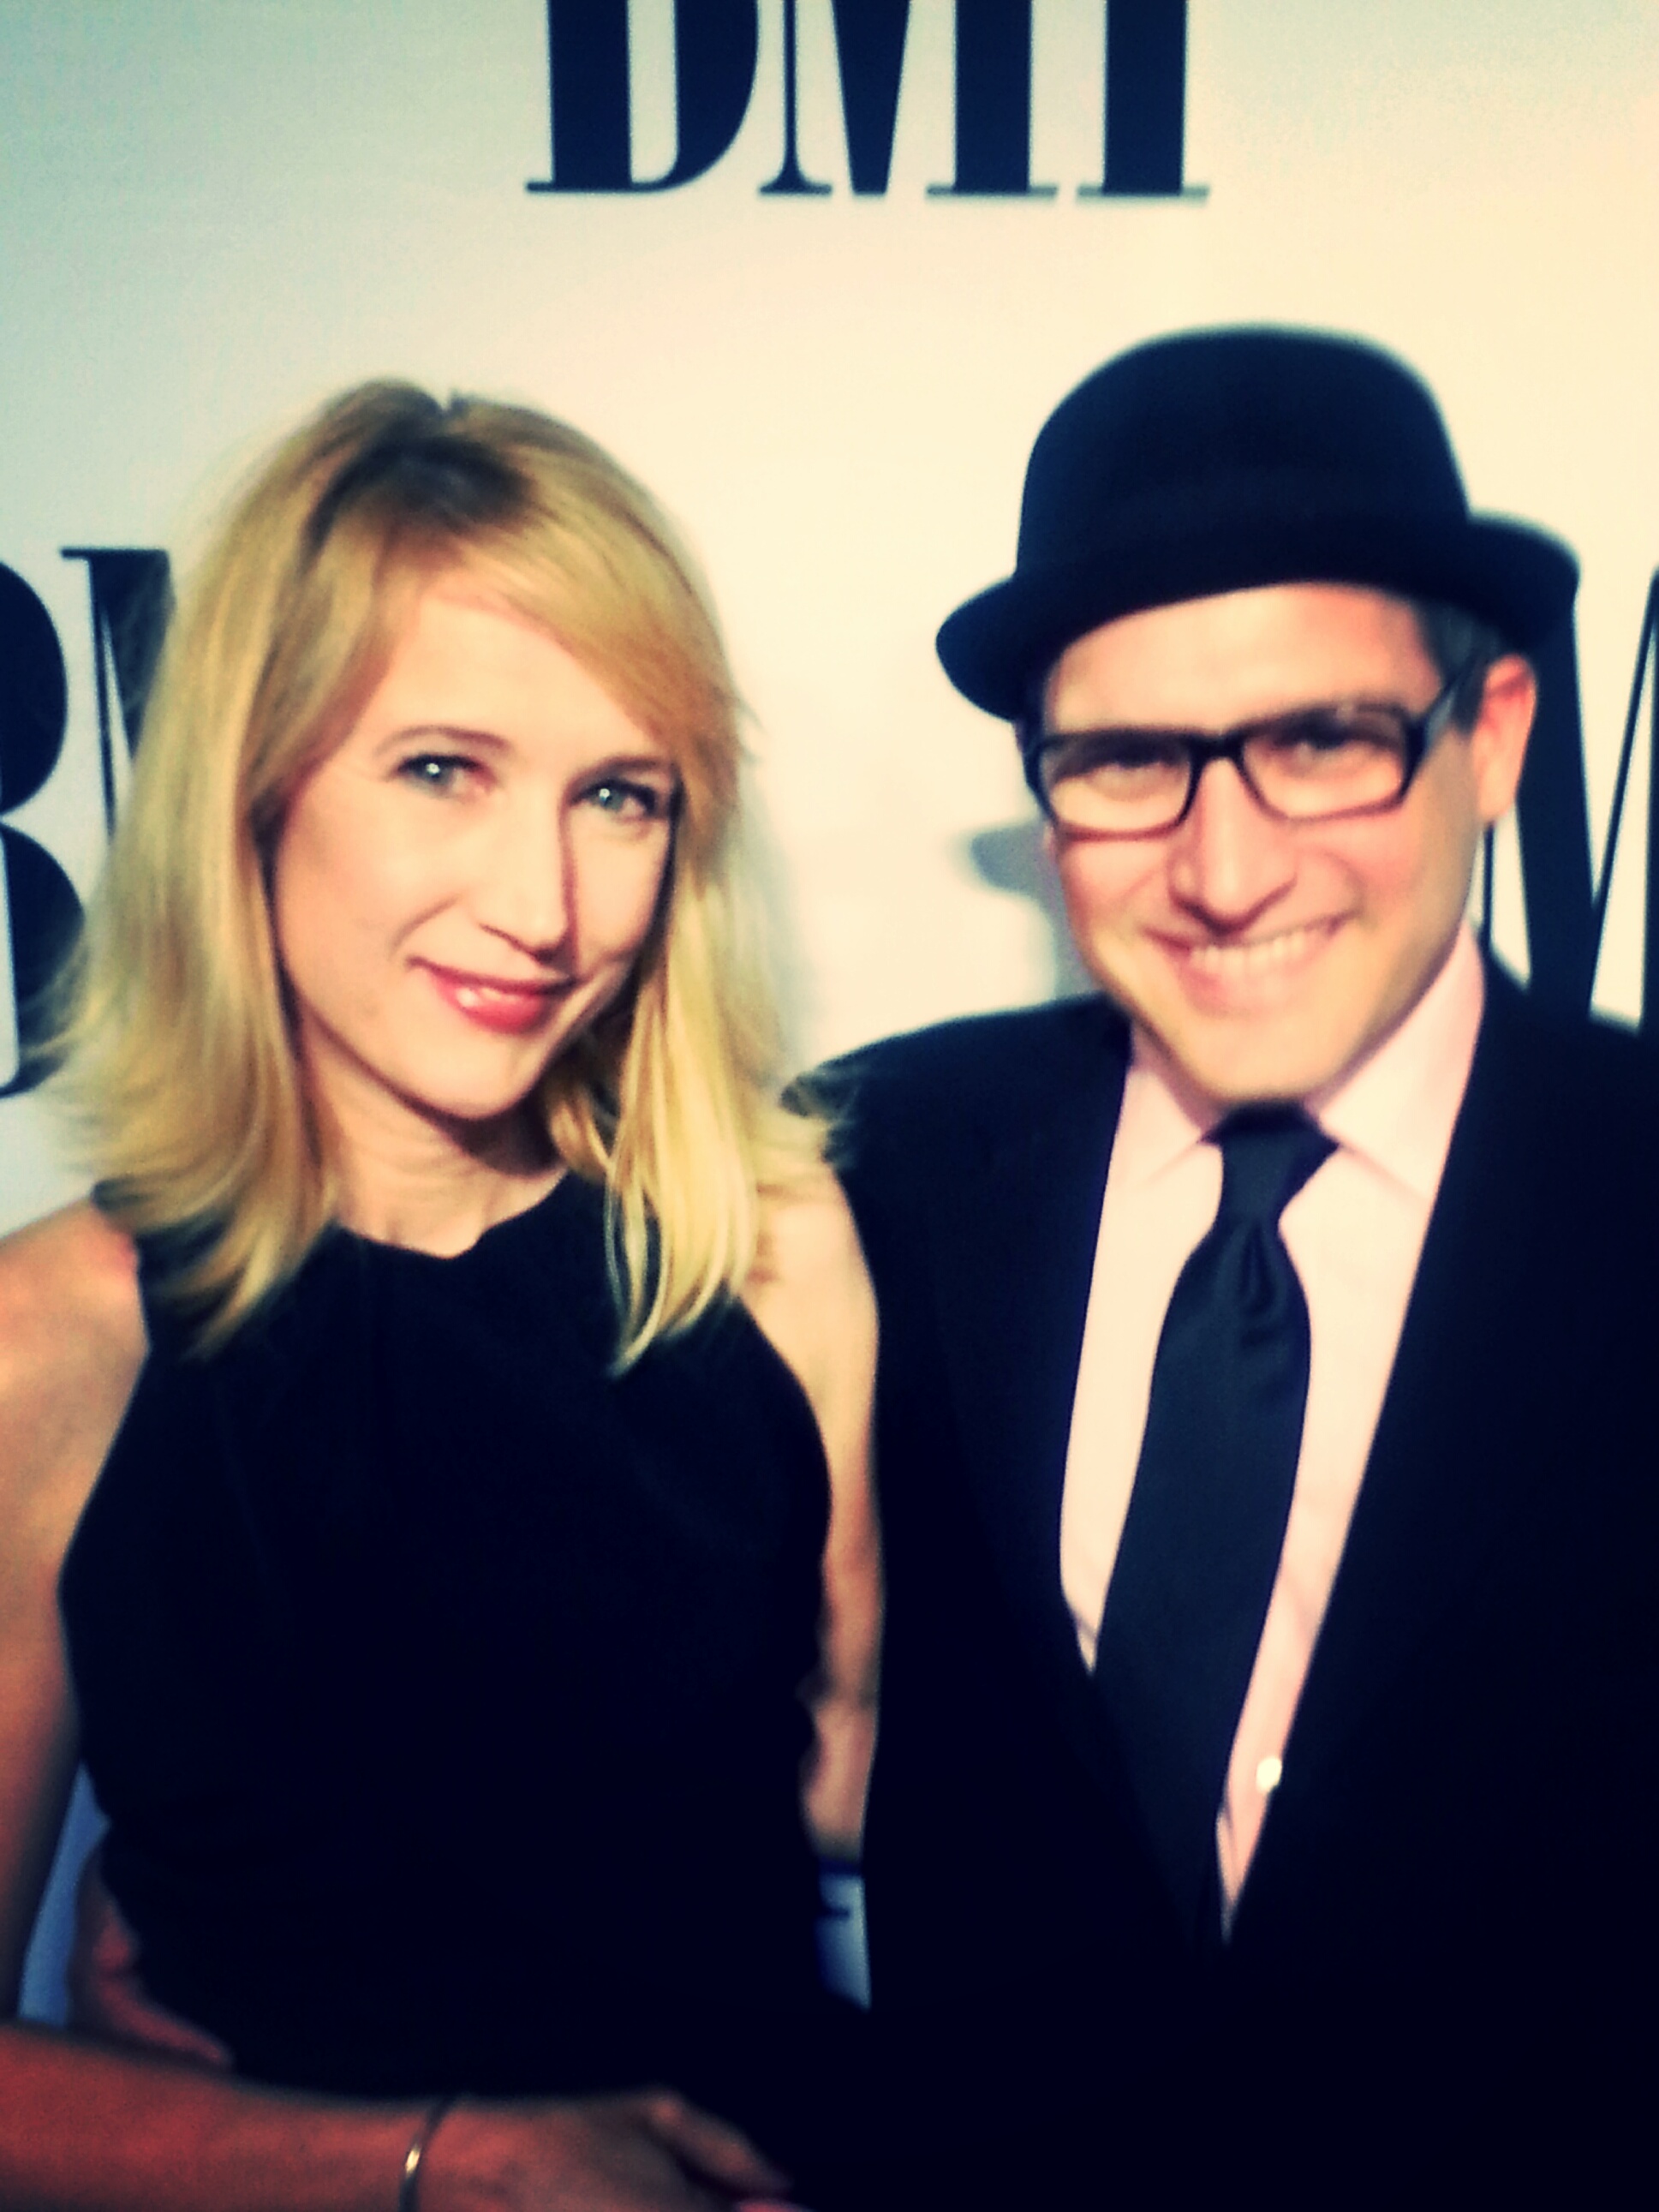 Kris McGaha and composer Eban Schletter. The 2014 BMI Film and Television Awards, held May 14, 2014 at the Beverly Wilshire Hotel in Beverly Hills.